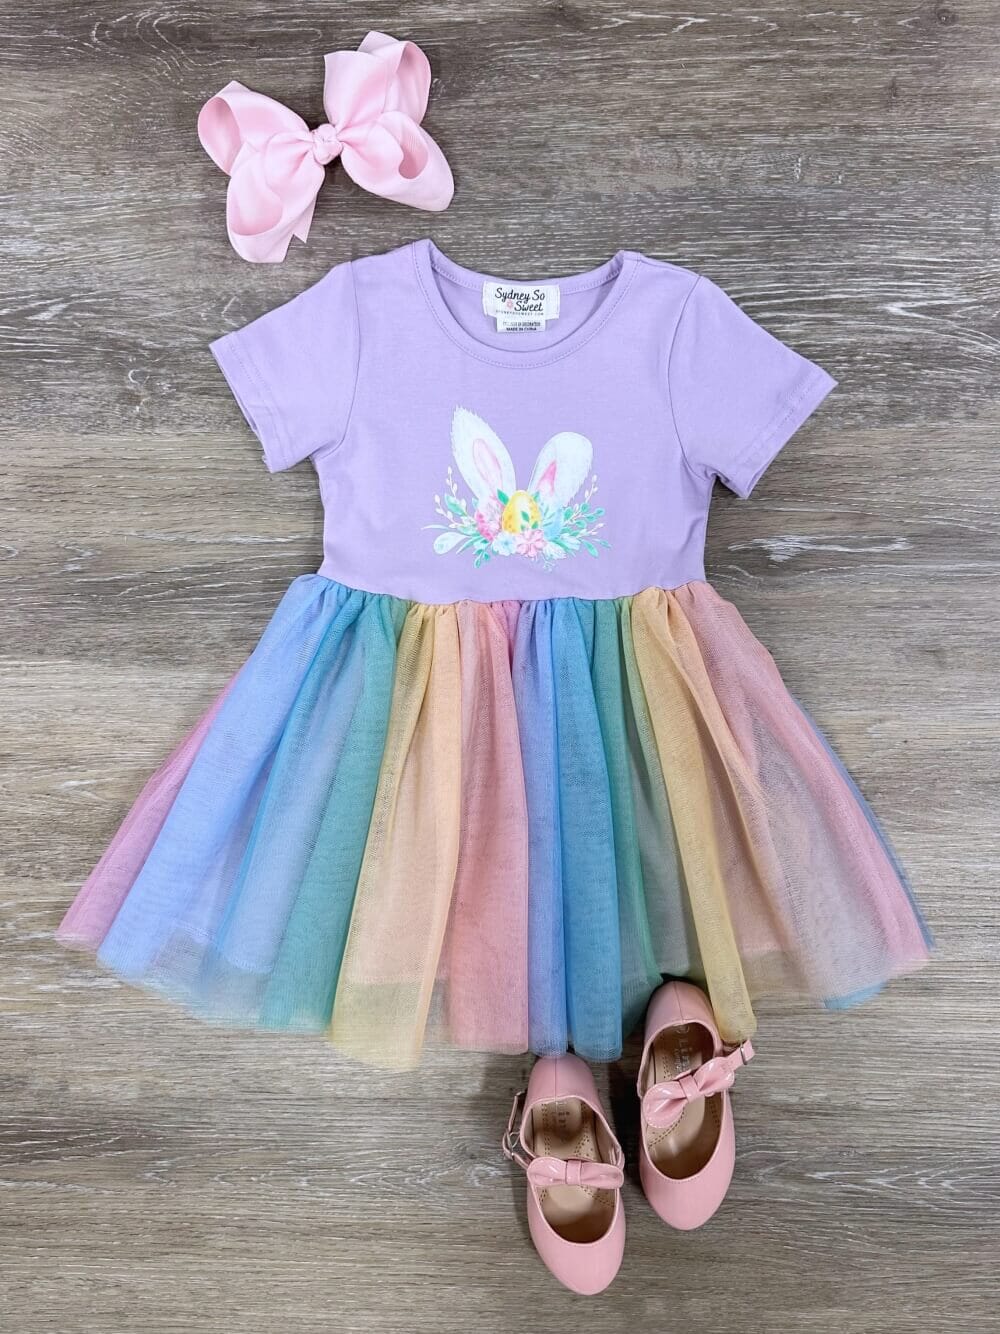 Little Girl Easter Outfits & Easter Dresses, Ships from Ohio